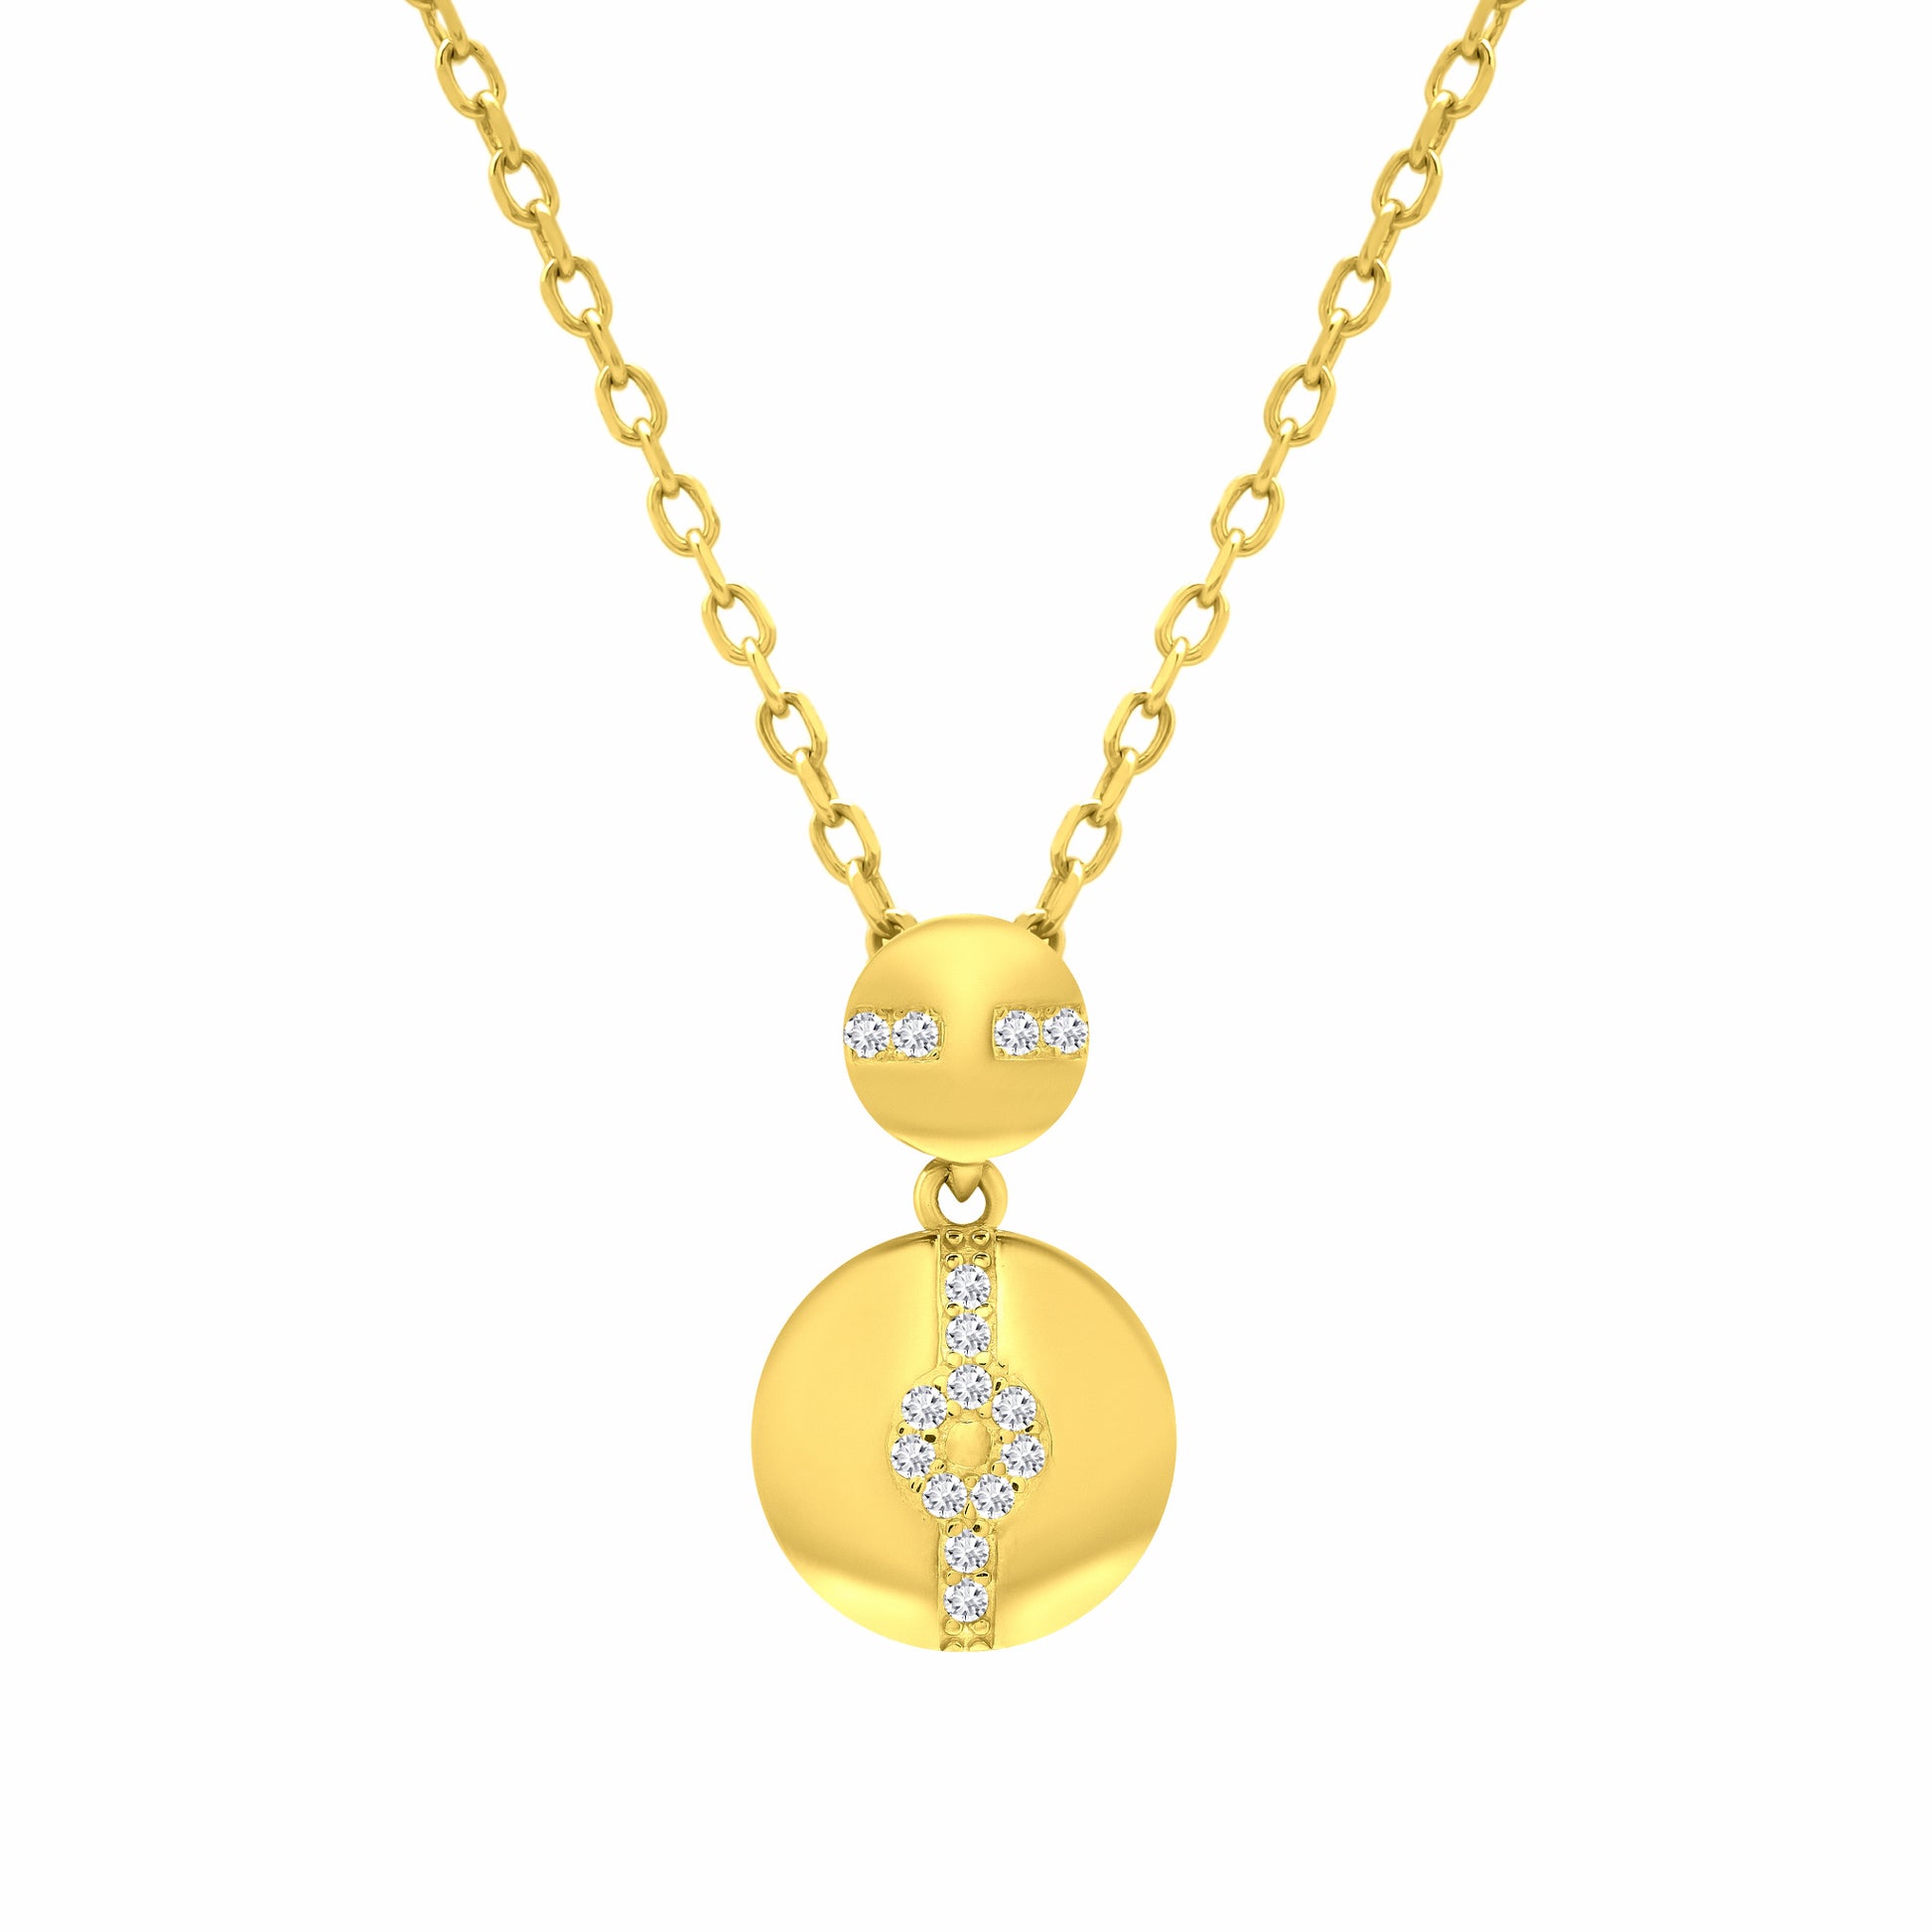 Hypnotic Solar Gold Necklace on white background